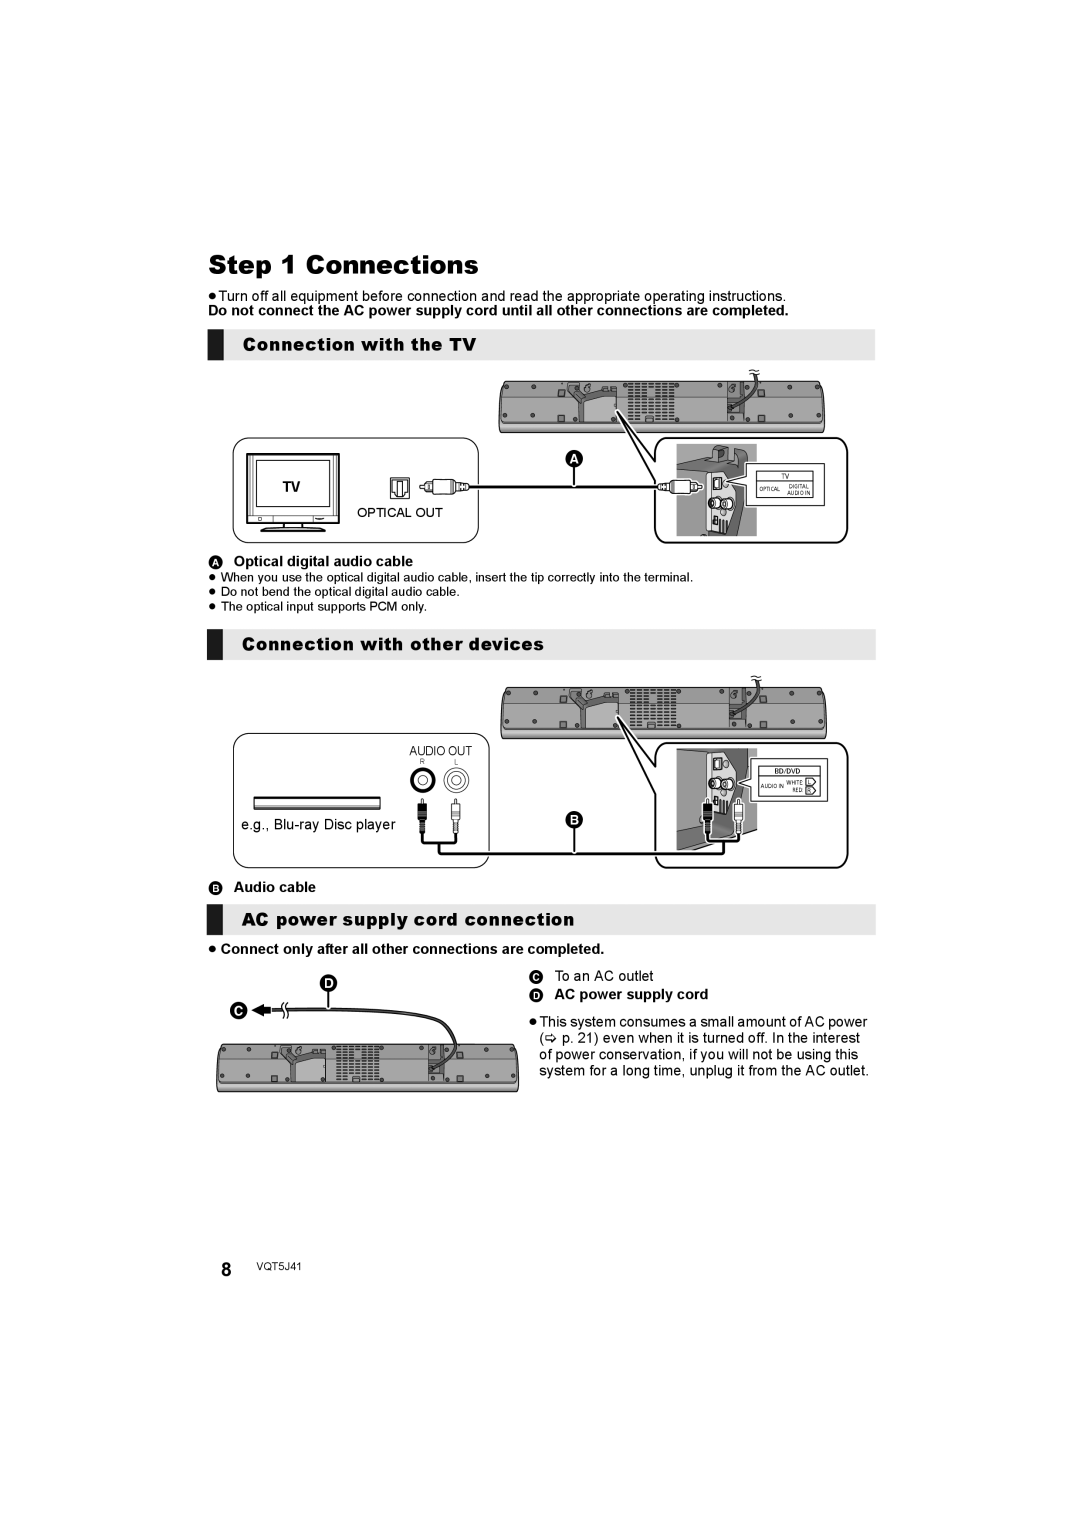 Panasonic SC-HTB8 Connections, Connection with the TV A, Connection with other devices, AC power supply cord connection 